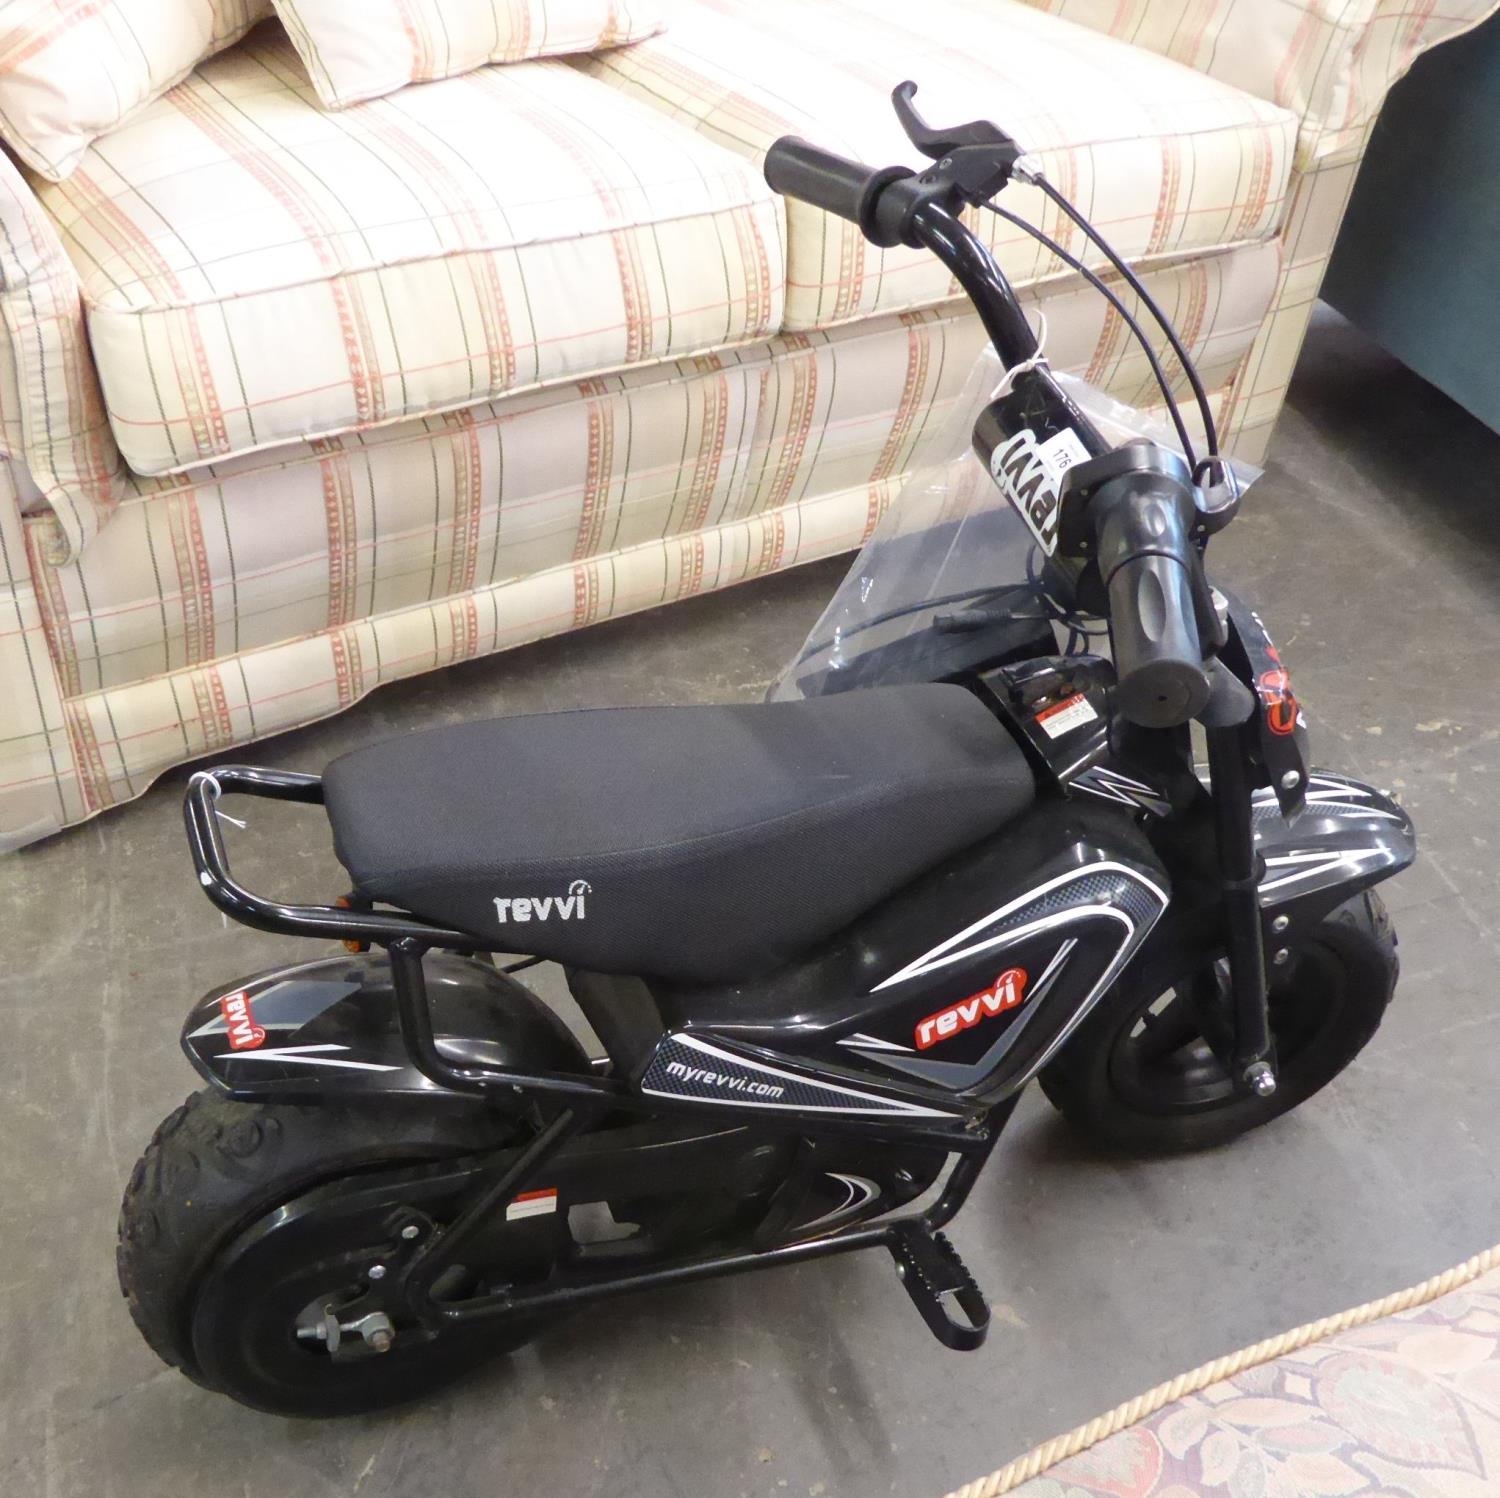 REVVI YC52 CHILD'S ELECTRIC MOTORBIKE, 24 VOLT, WITH CHARGER